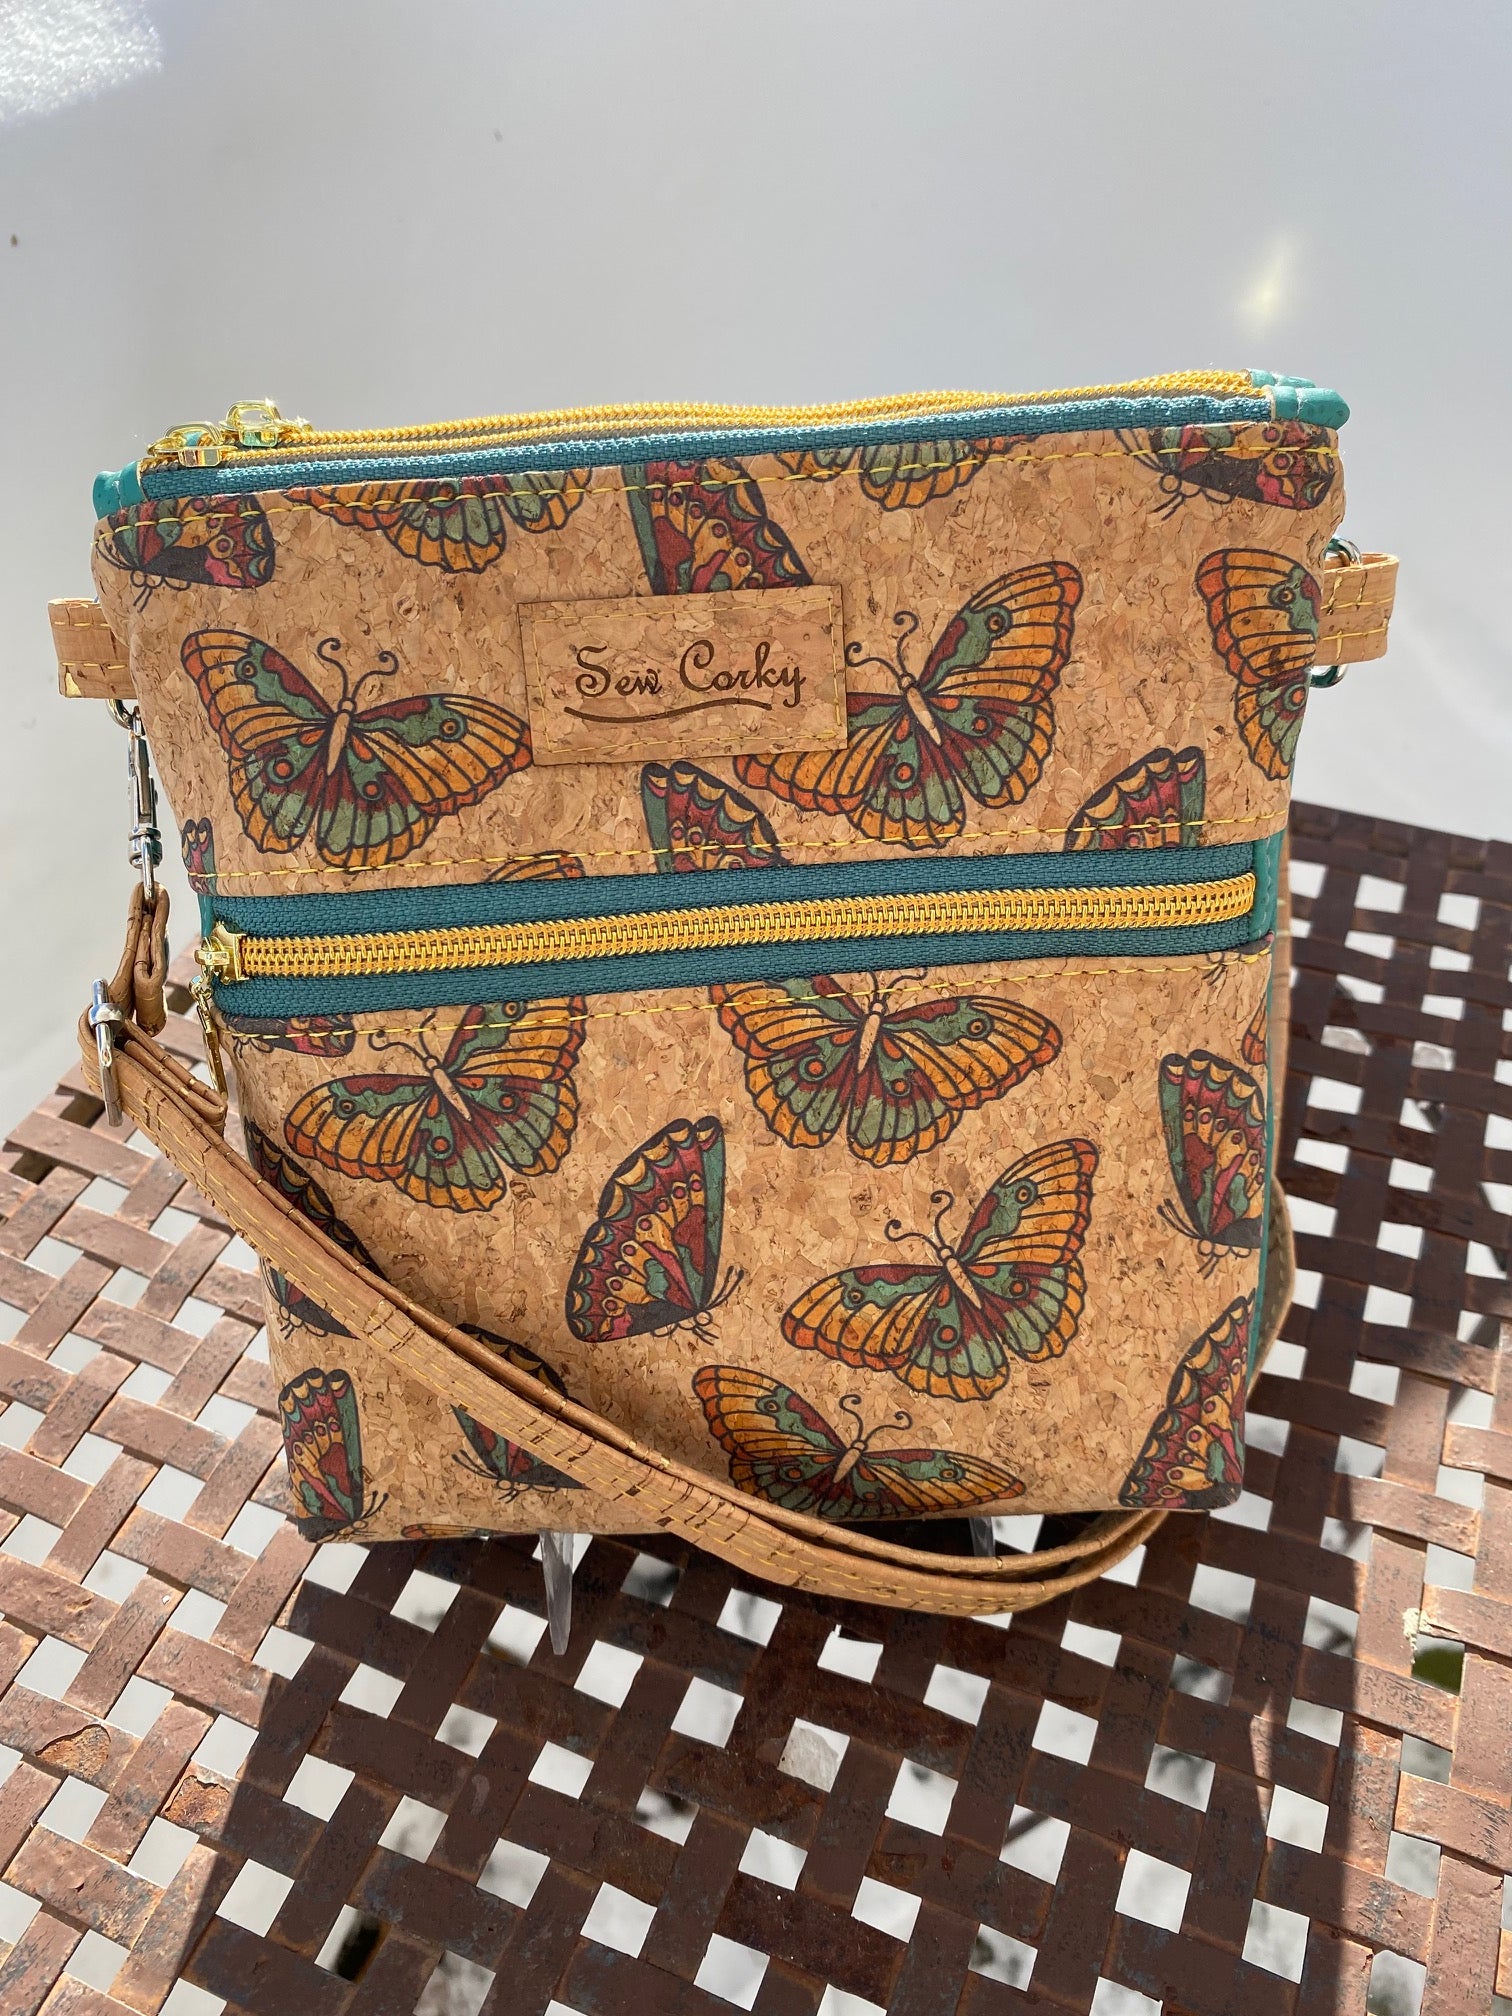 K5-THE BROOKIE CROSSBODY IN BLUE AND COLORED BUTTERFLIES